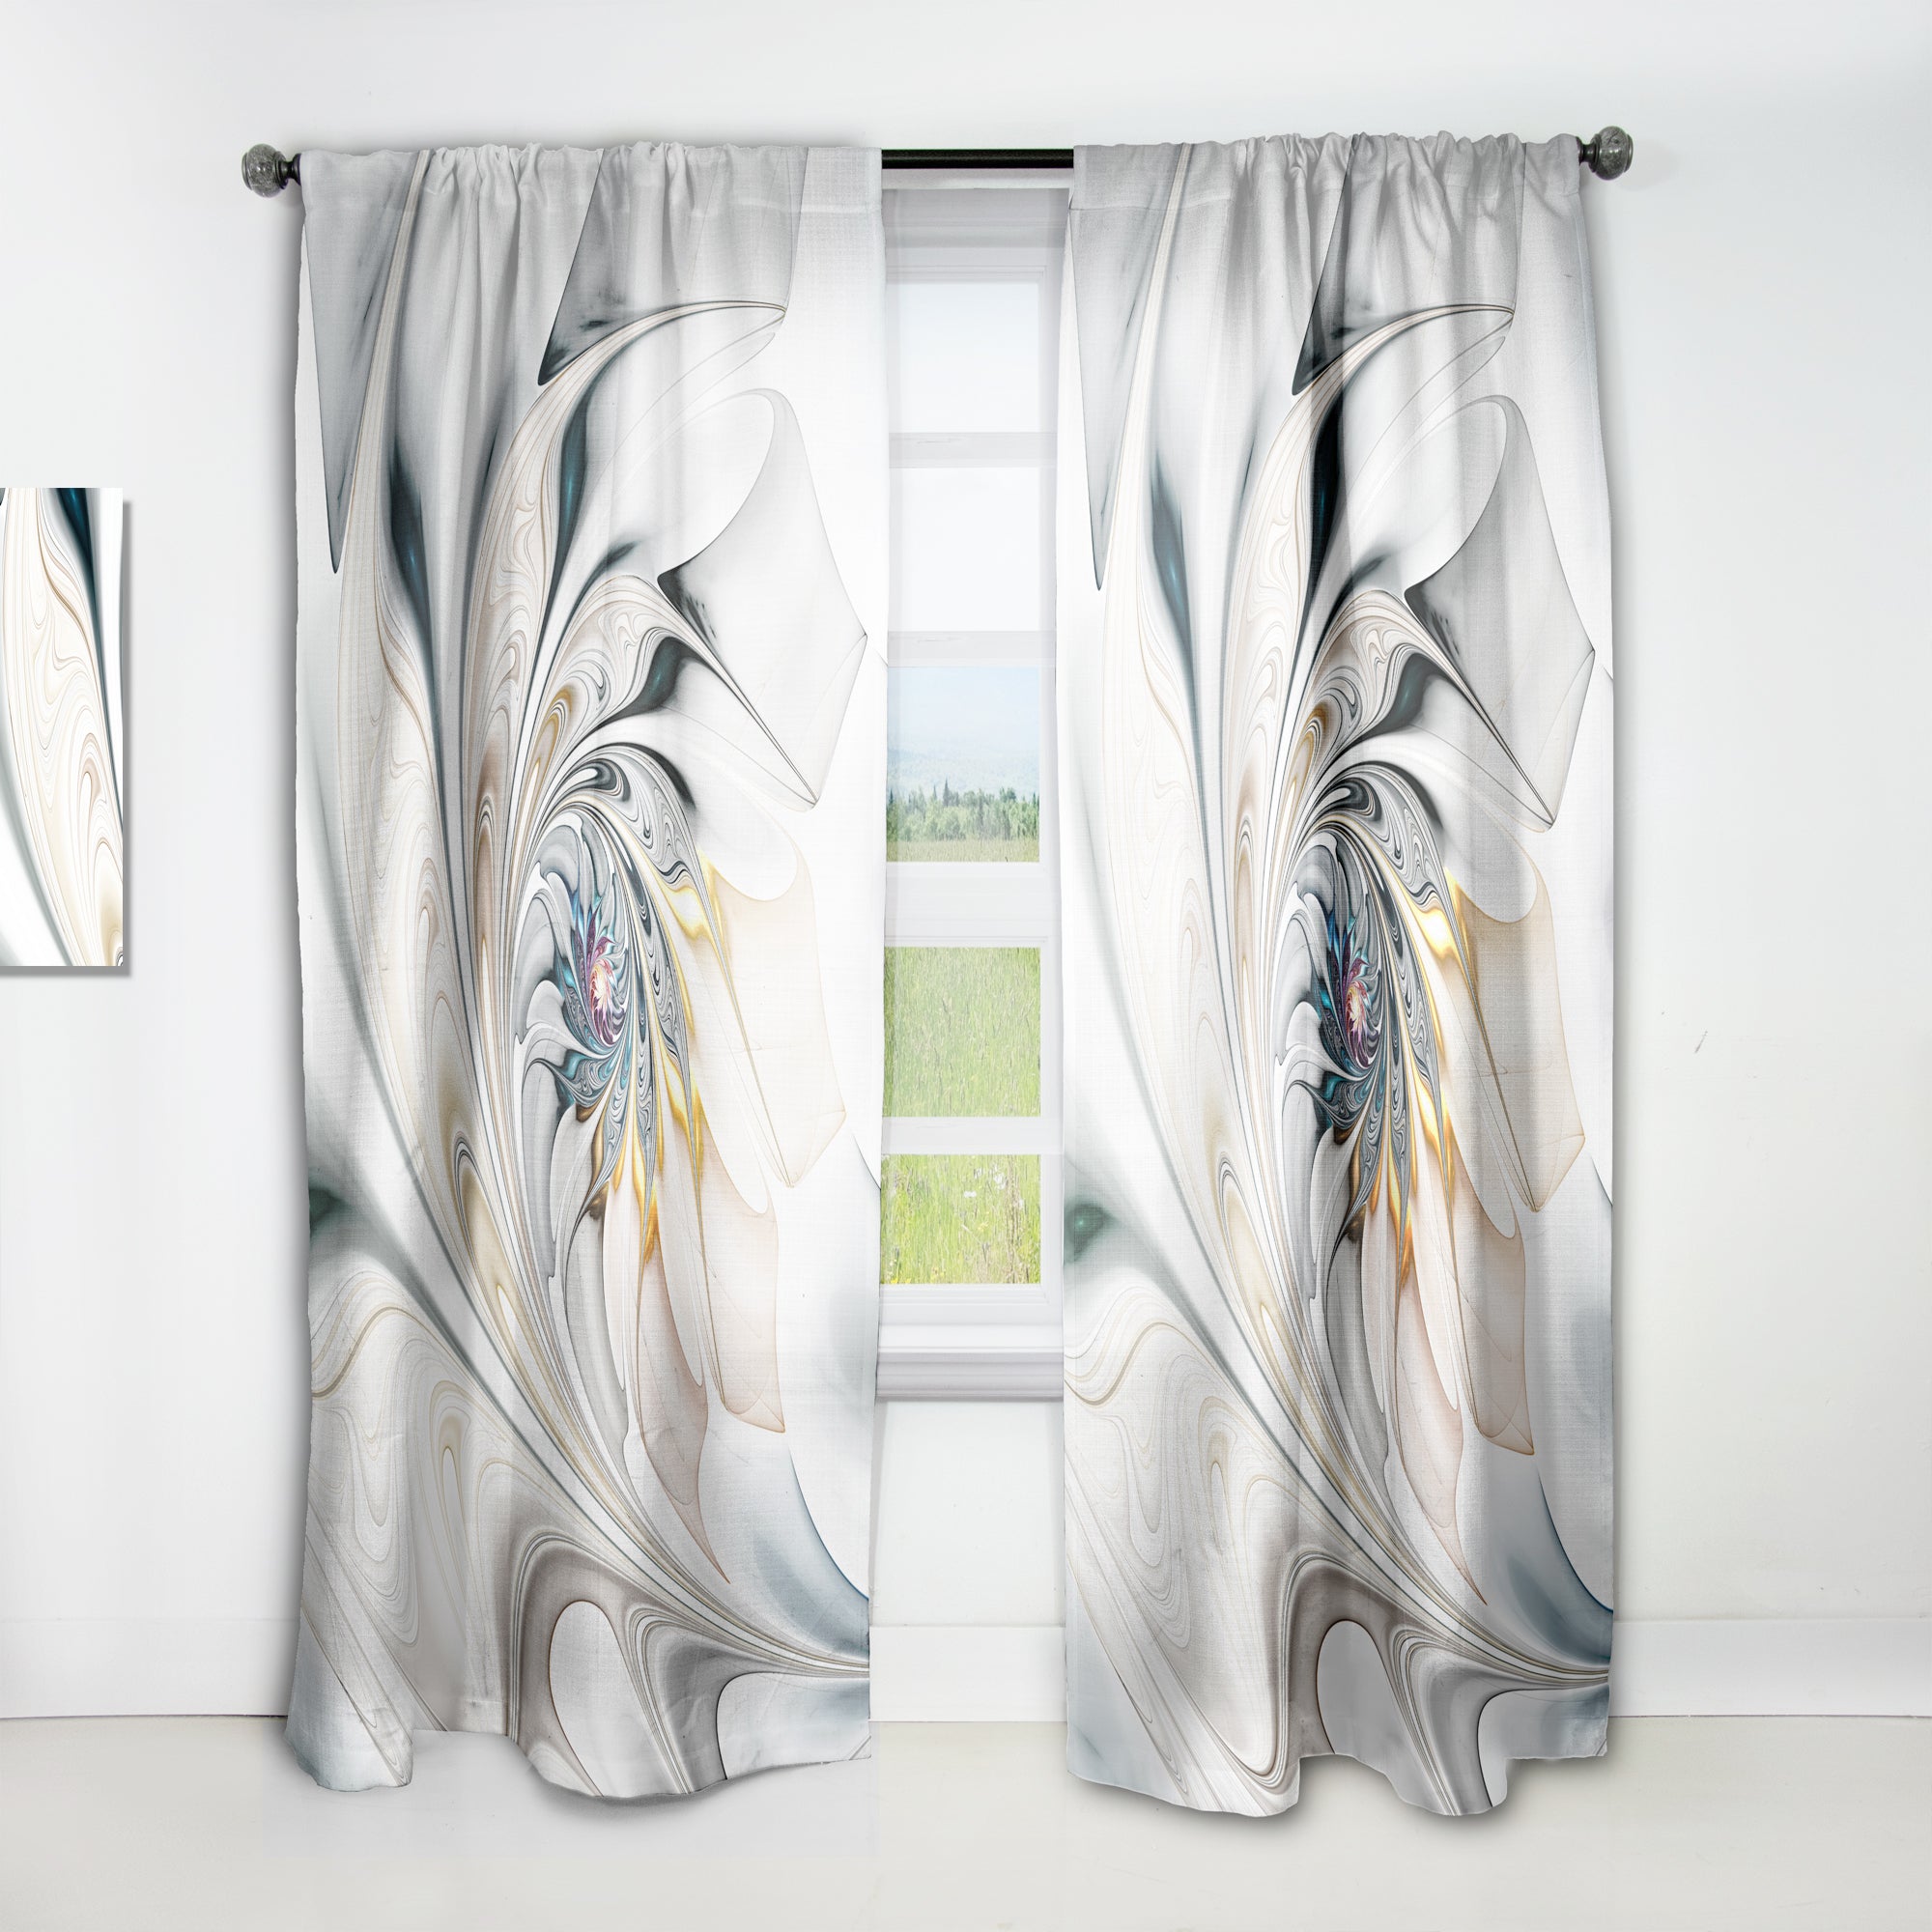 Designart 'White Stained Glass Floral' Modern Curtain Panel